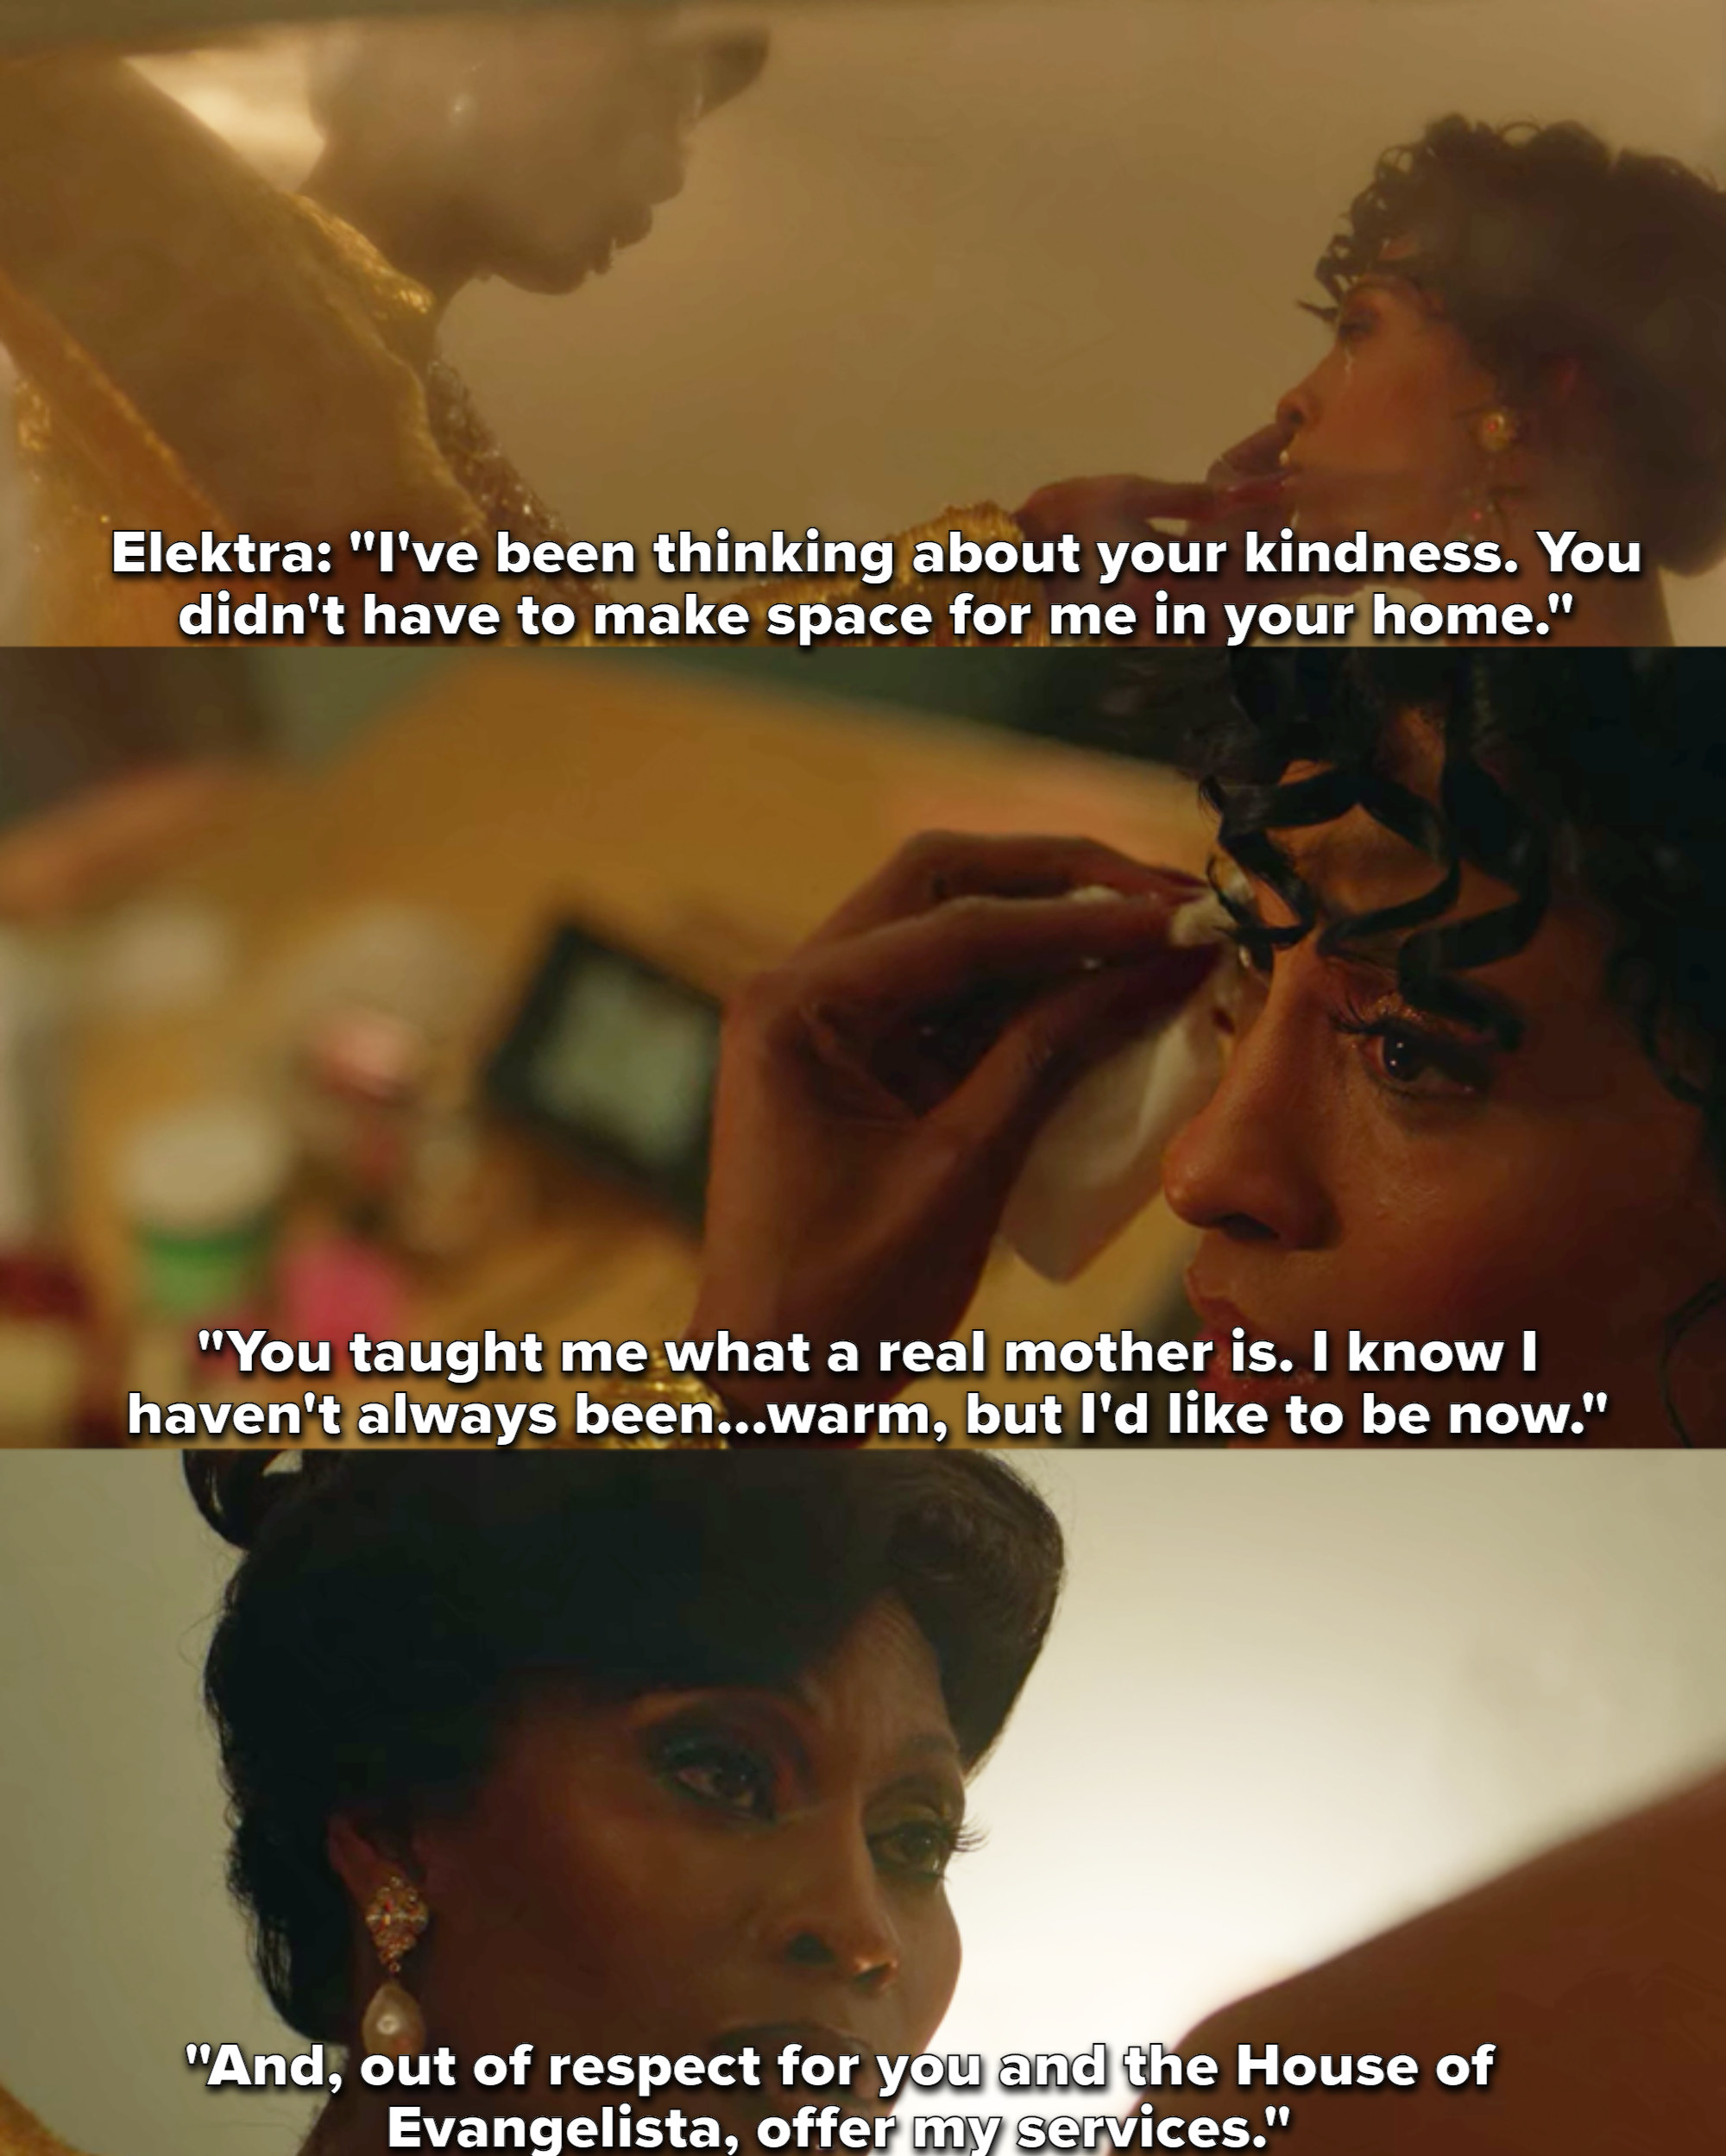 Mj Rodriguez and Dominique Jackson as Blanca Evangelista and Elektra Abundance in the show &quot;Pose&quot;